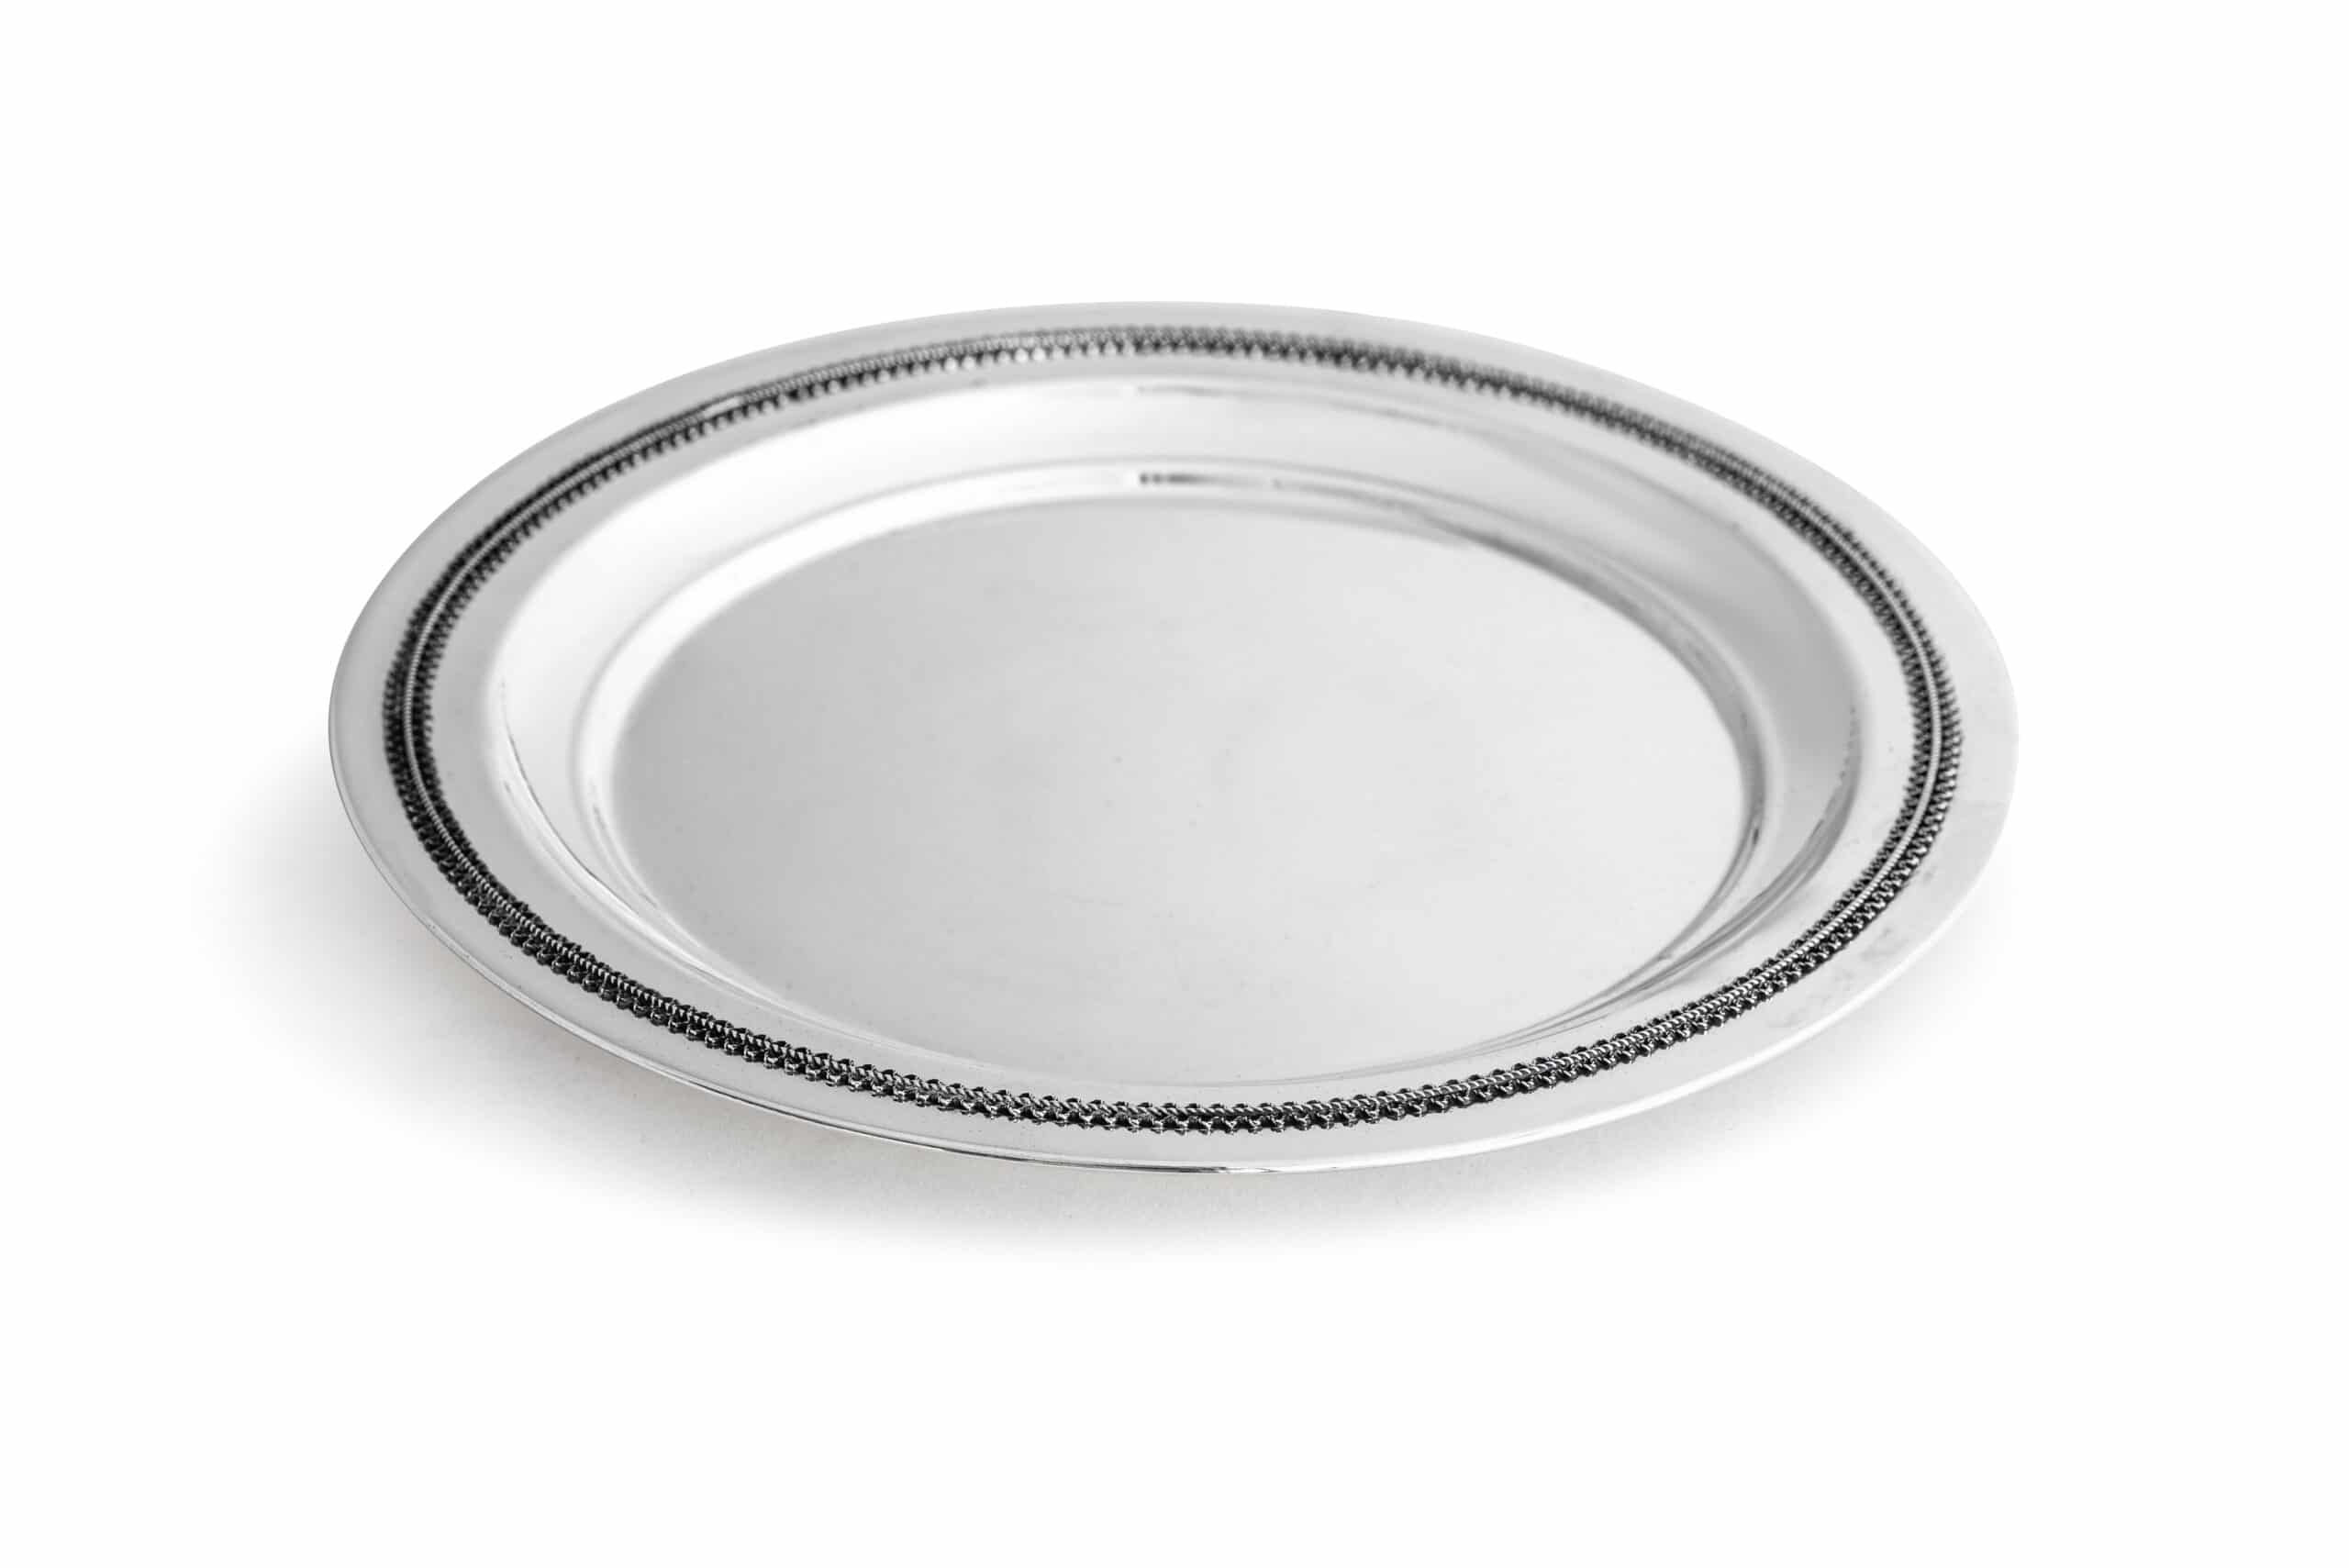 Classic Silver Plate for Kiddush with Filigree Rim